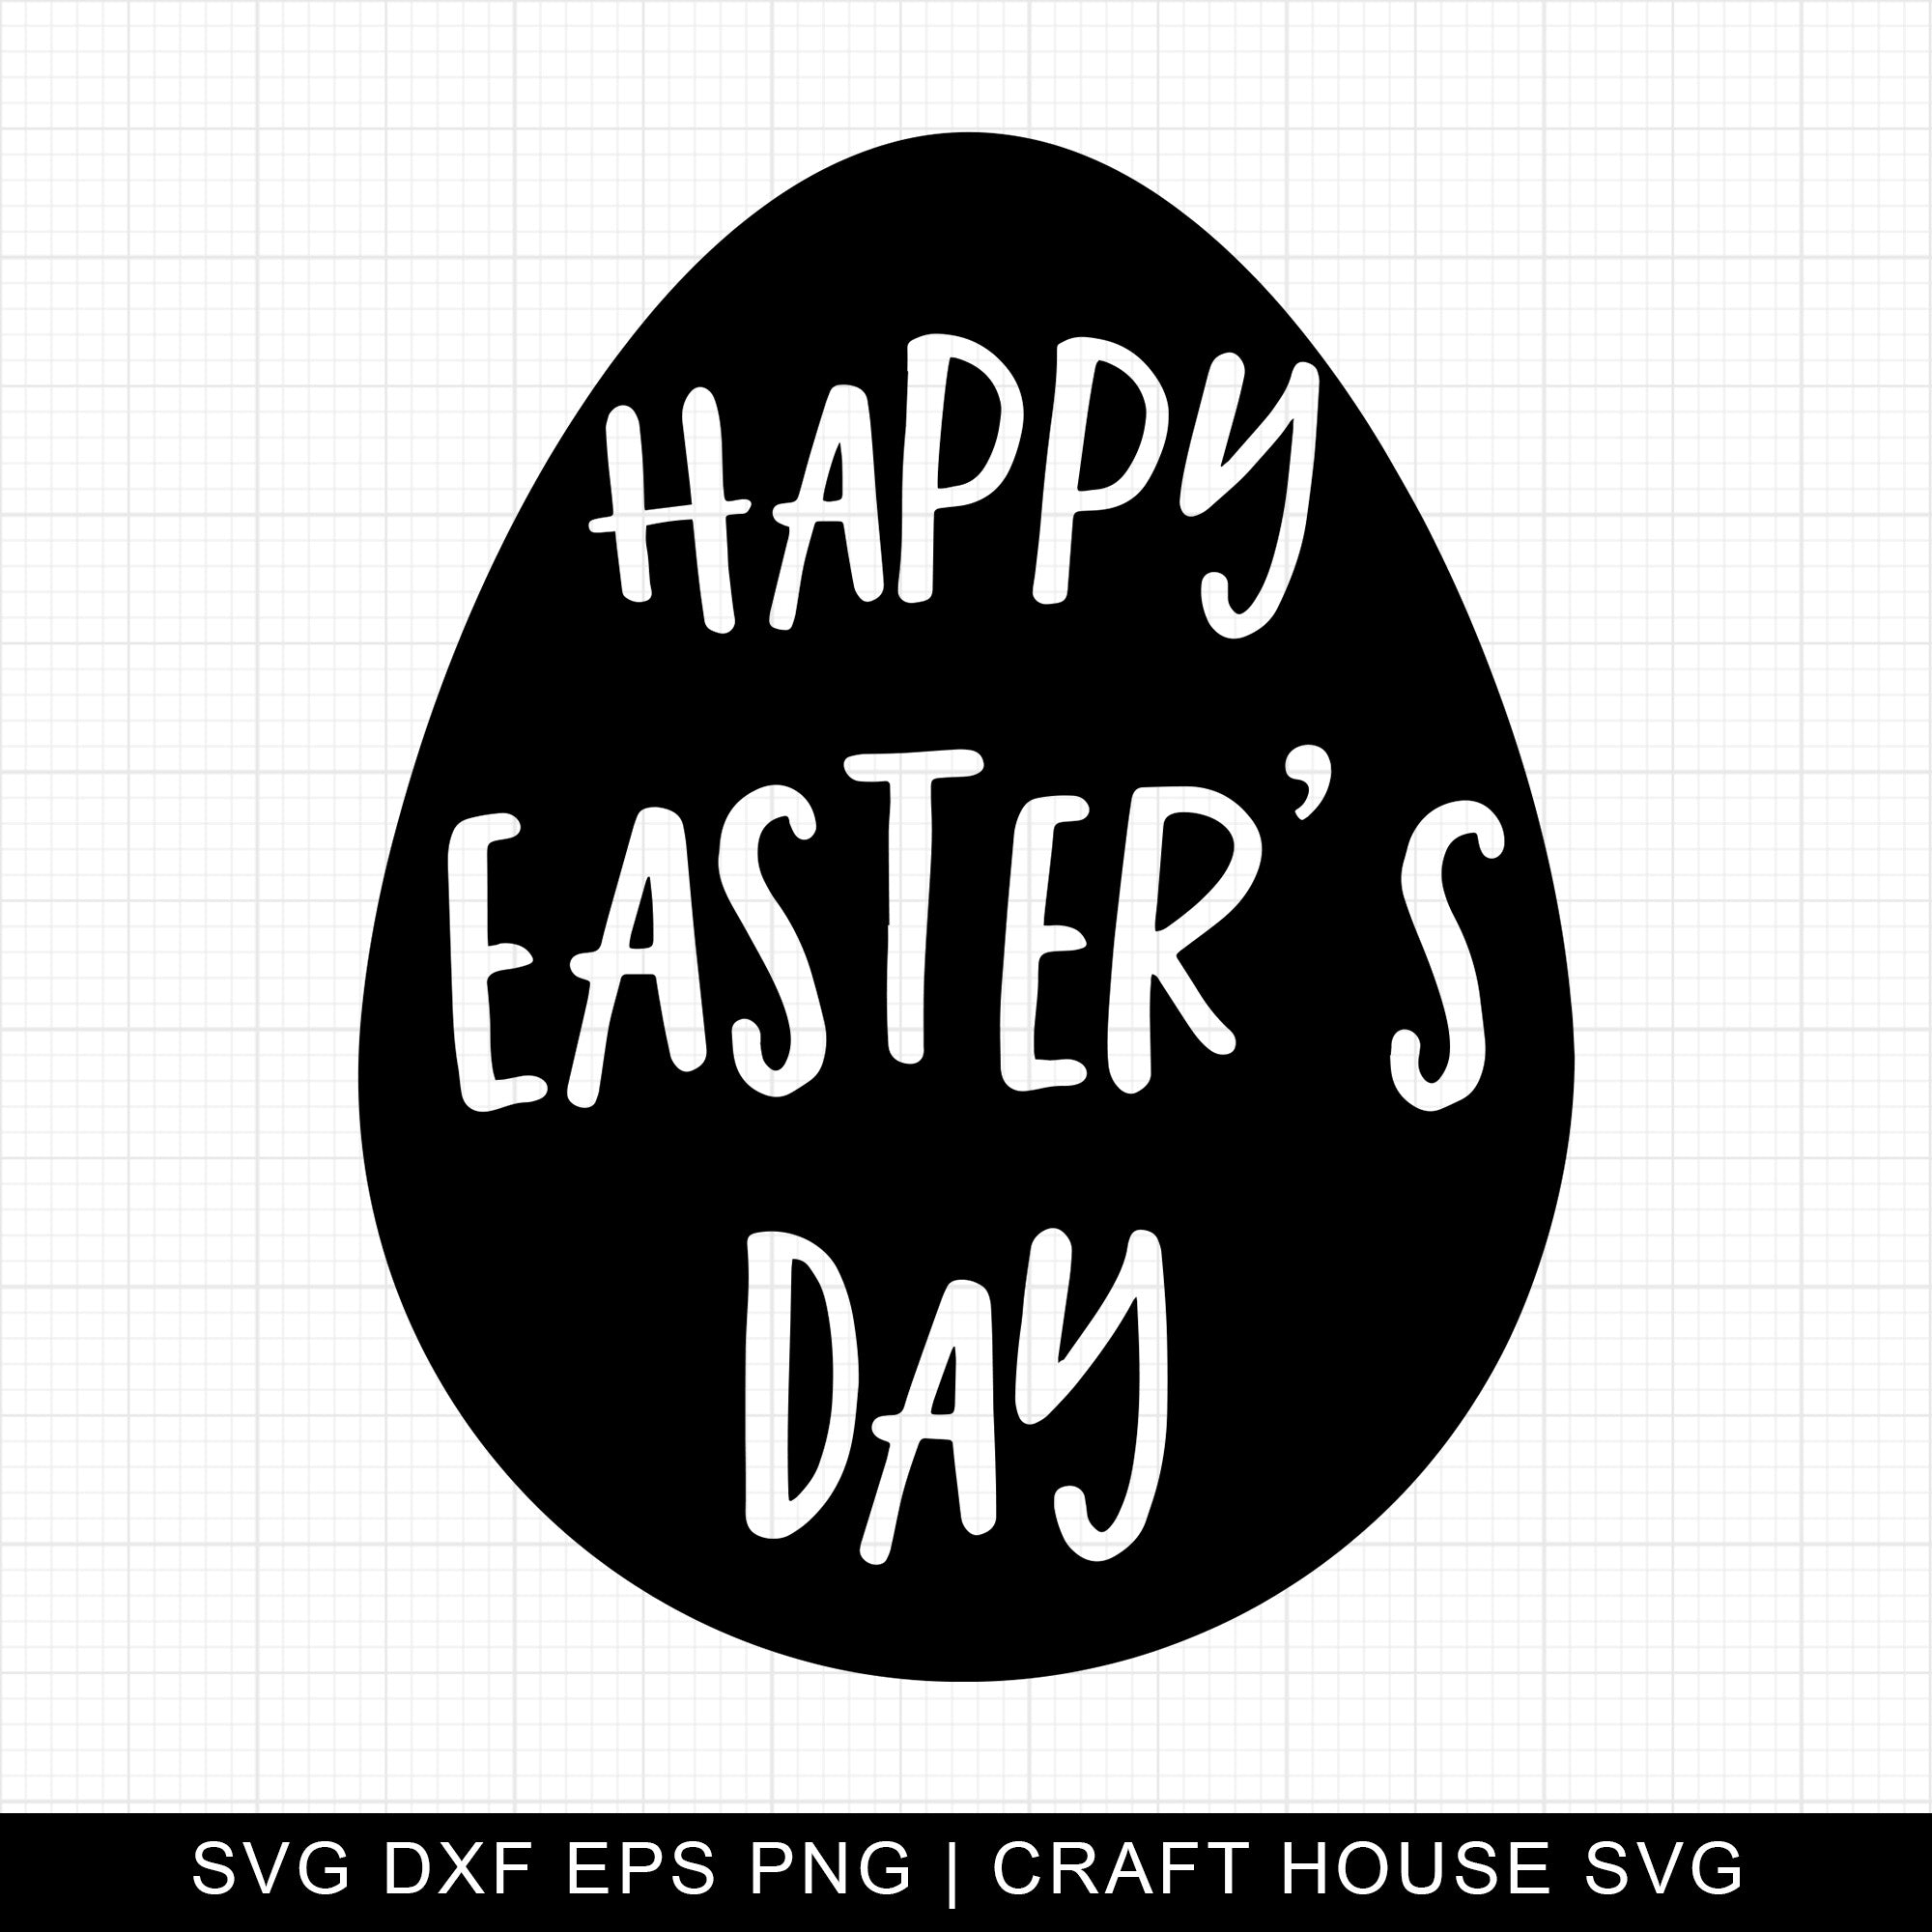 Happy Easter's Day SVG | M9F6